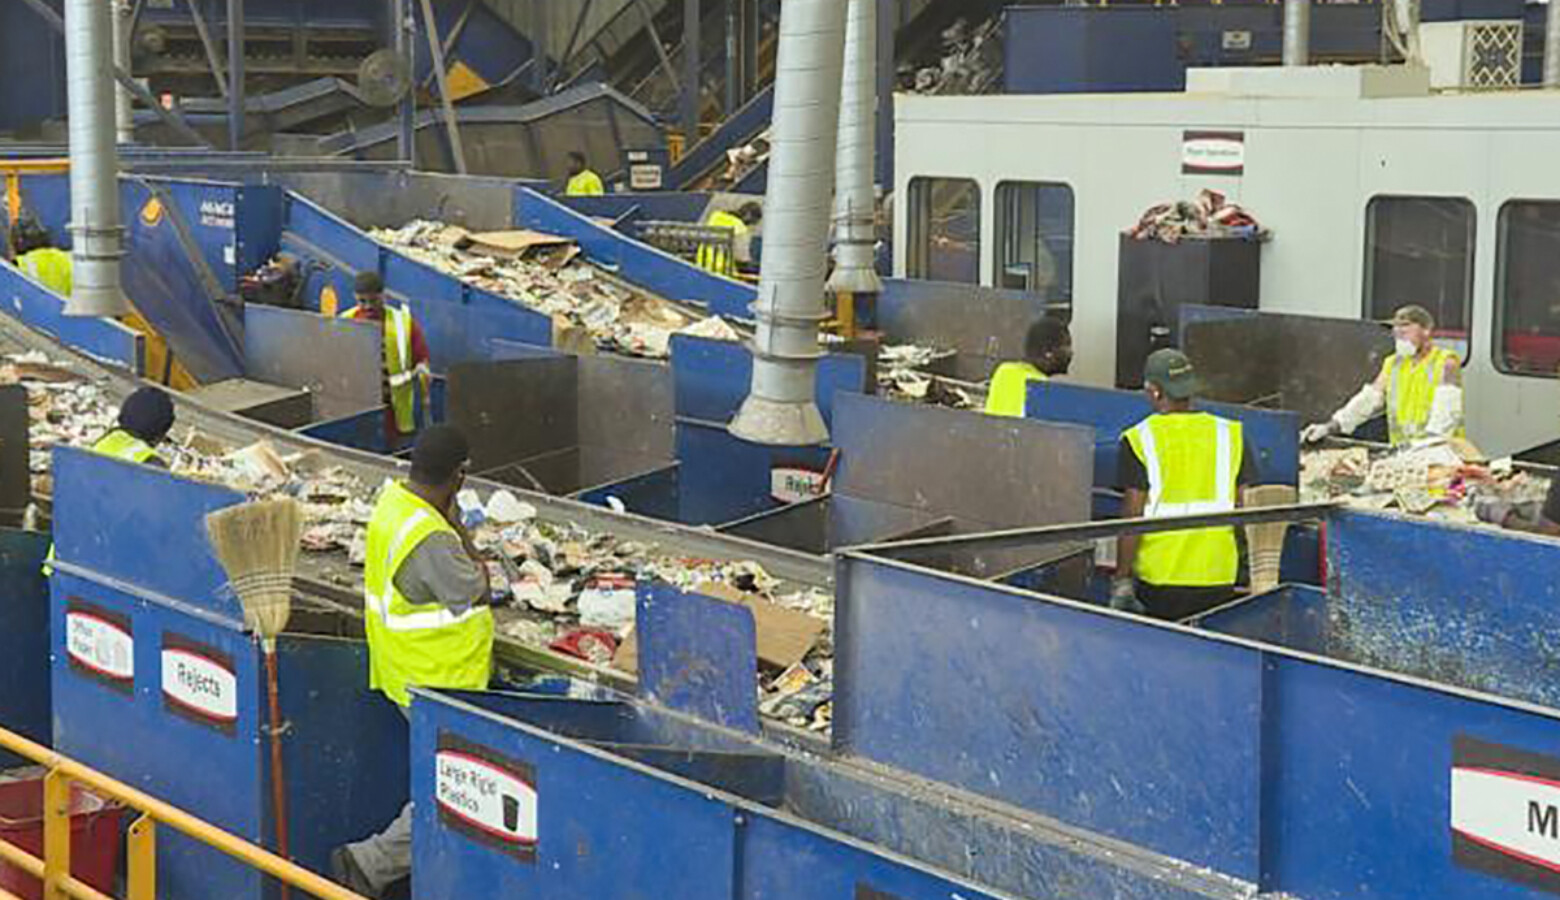 Experts say facilities where recycling is sorted and processed like the Rumpke Material Recovery Facility in Cincinnati, shown here, need funding to upgrade their technology and prevent contamination (FILE PHOTO: Zach Herndon/WTIU)